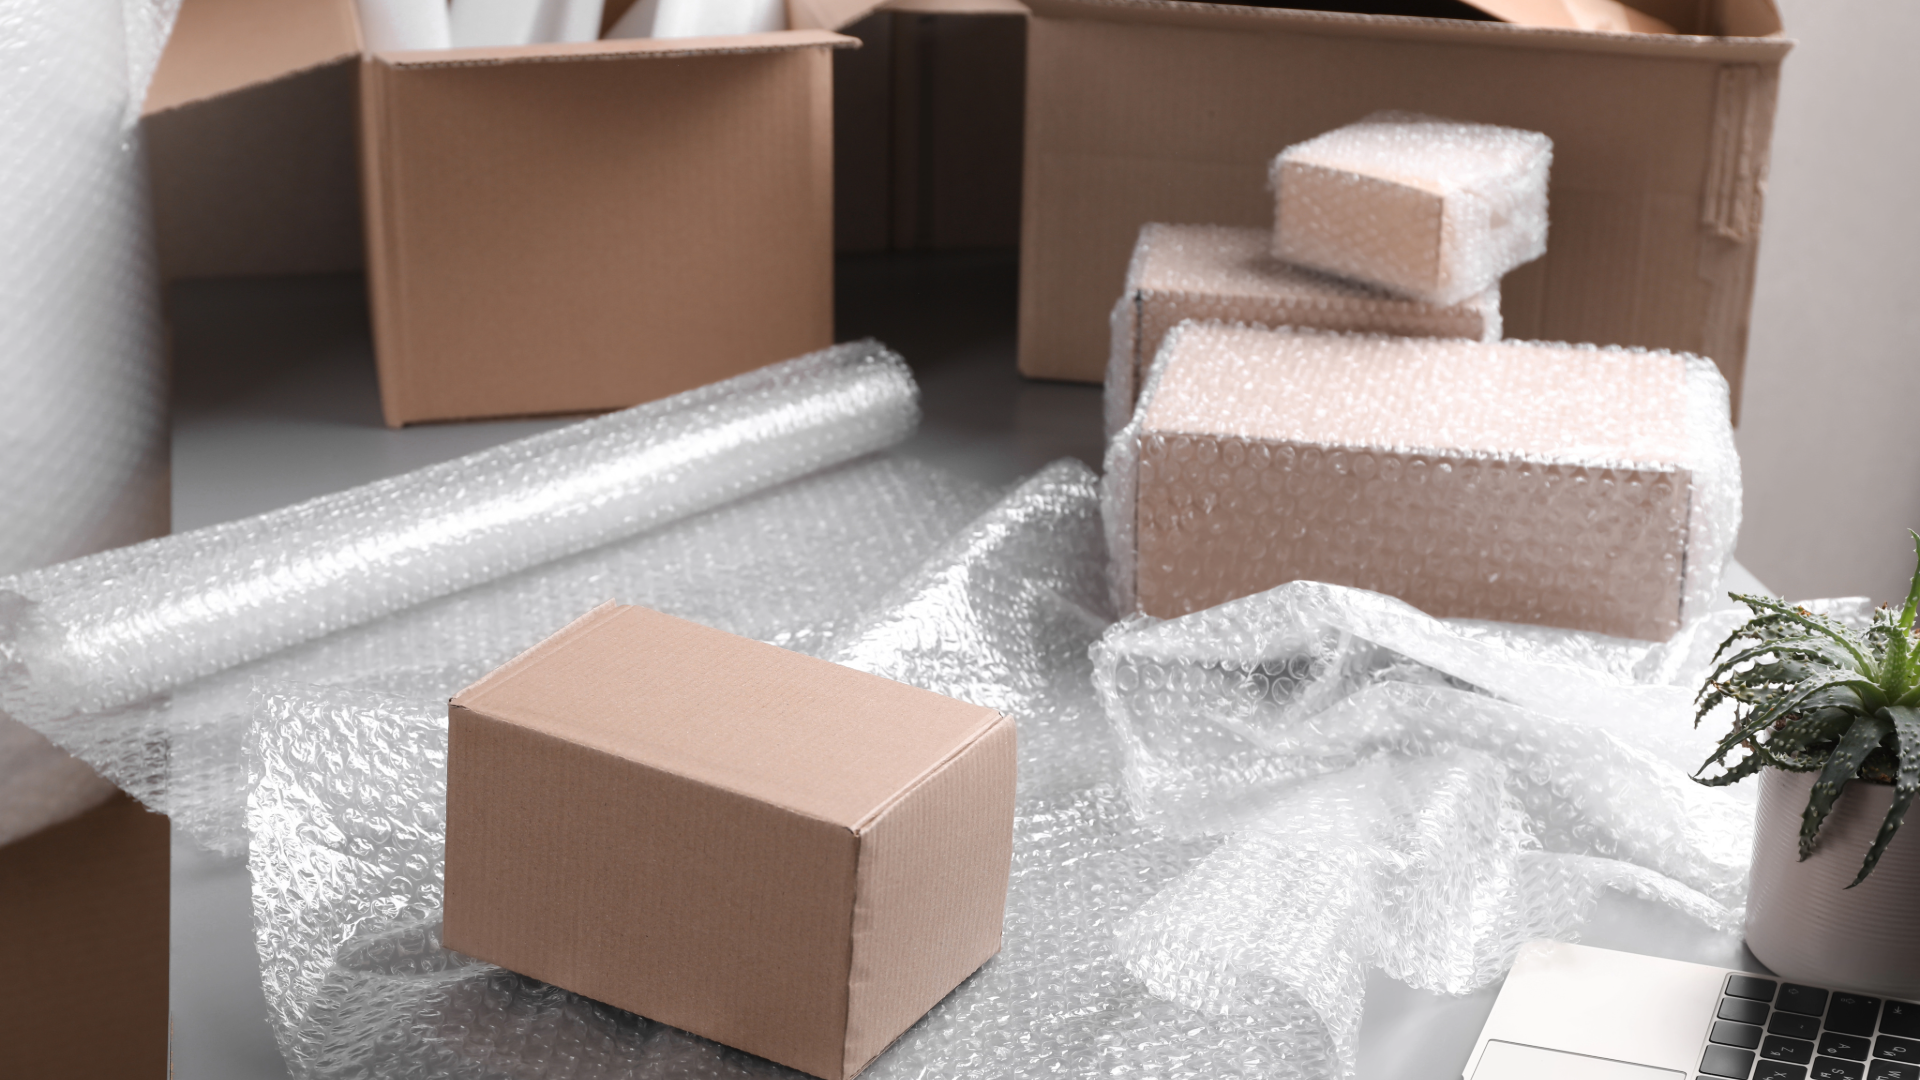 the Role of packaging in supply chain management